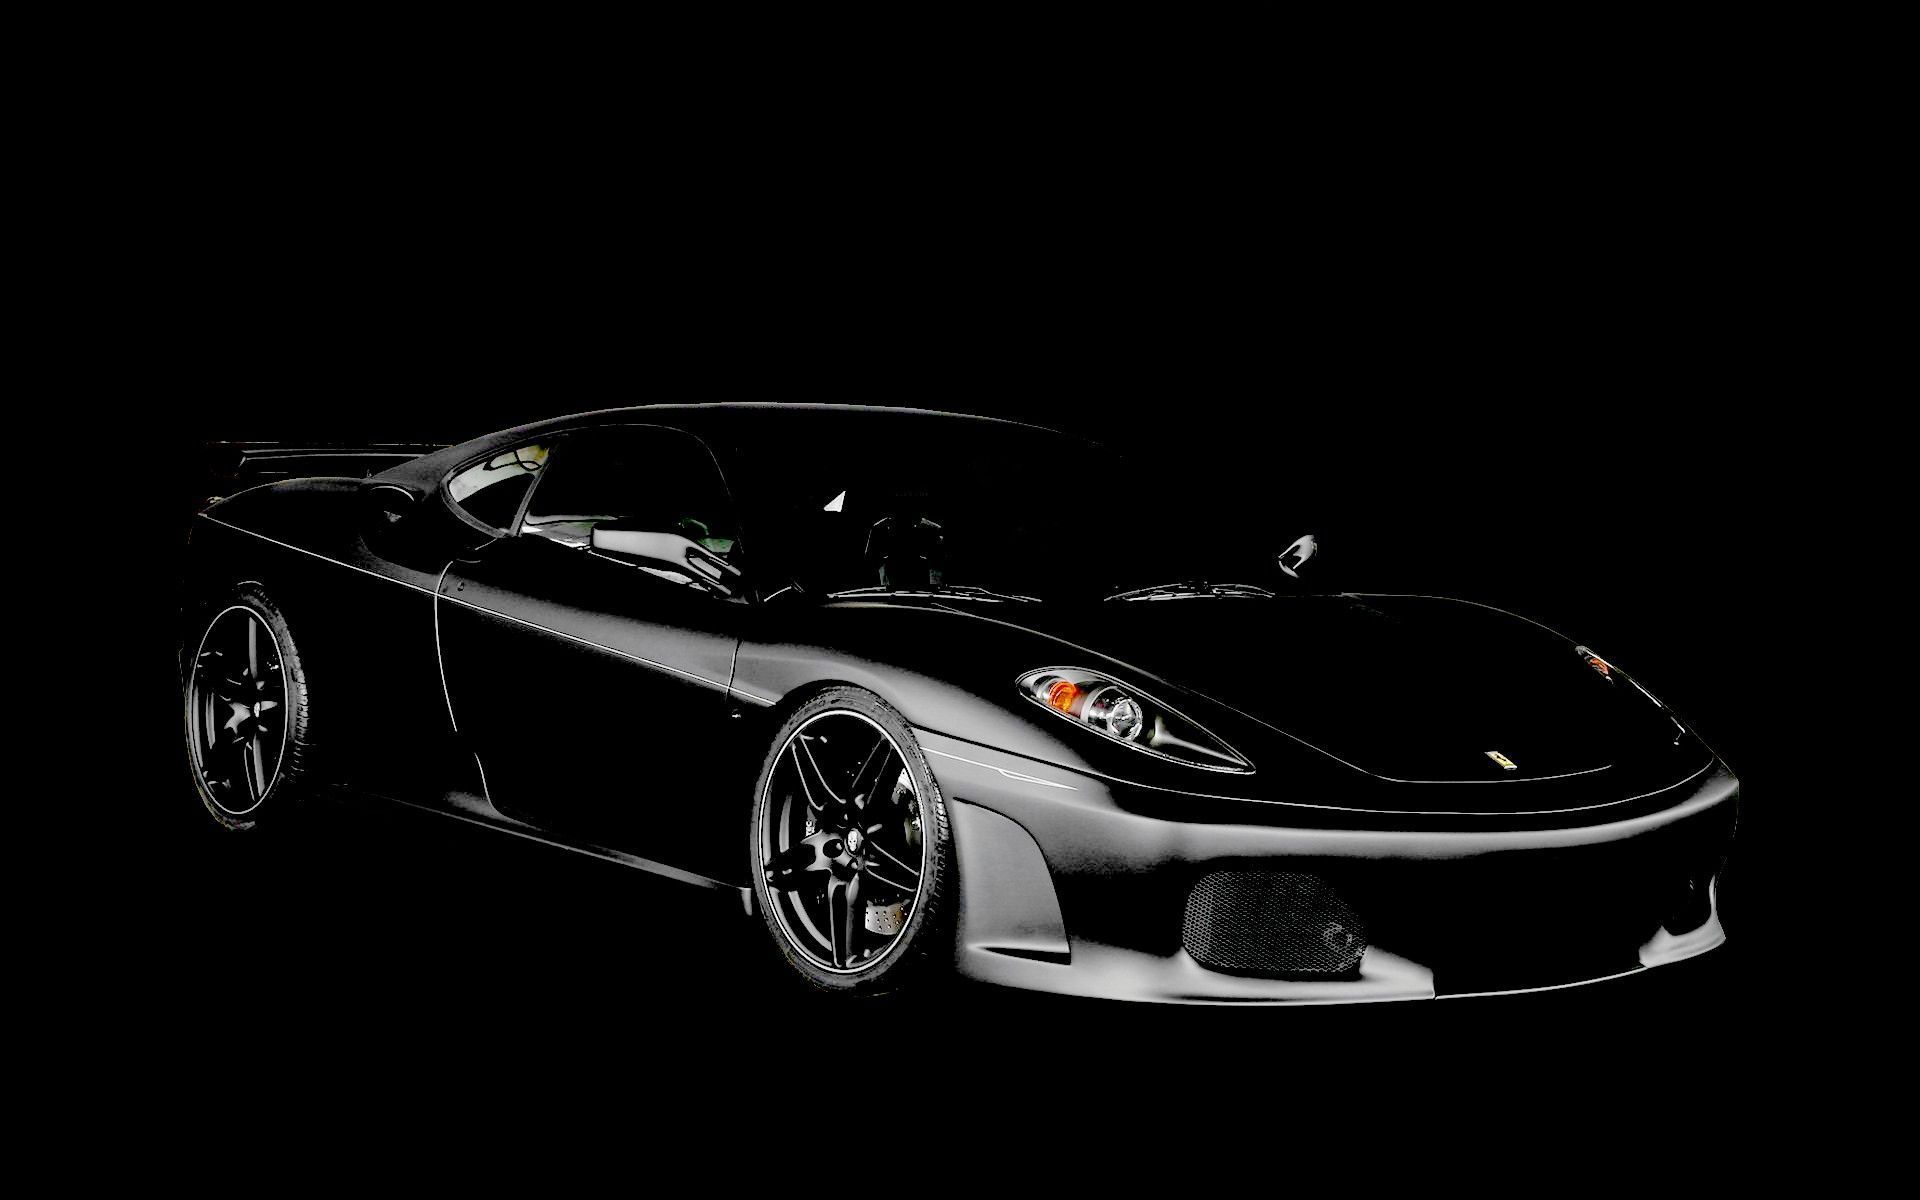 Black wallpaper with Ferrari wallpaper and image, picture, photo